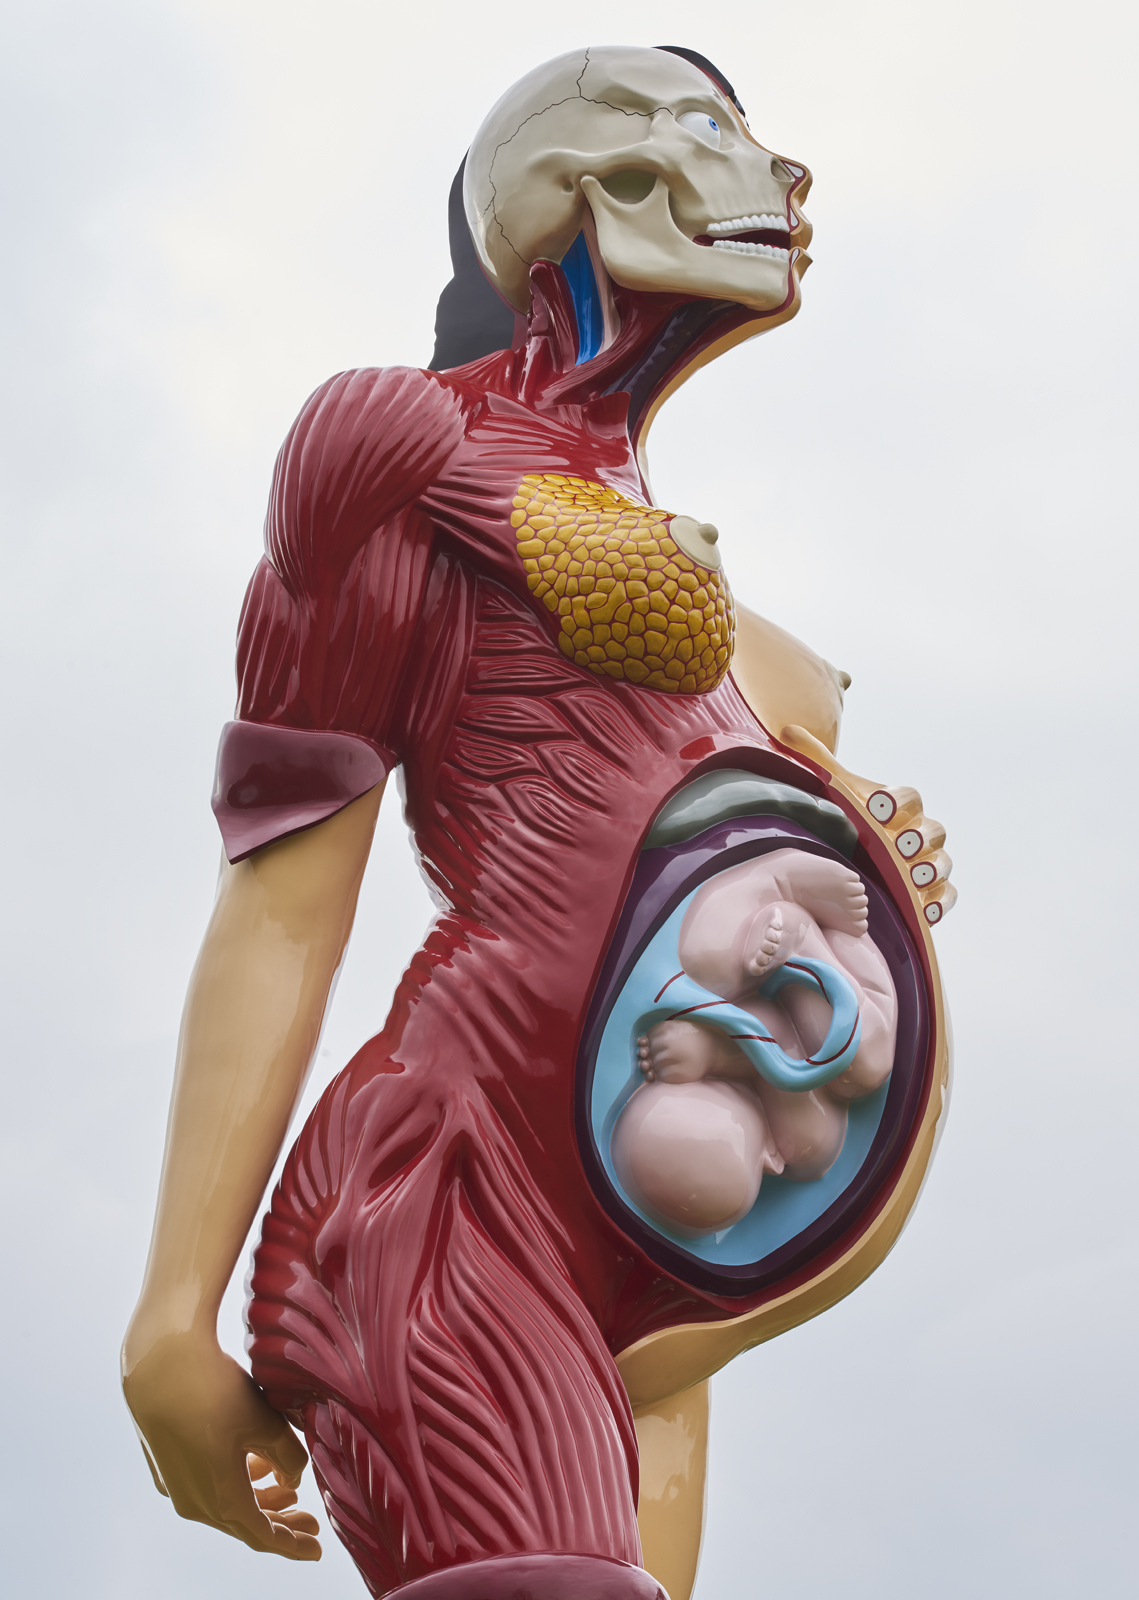 A large sculpture of a pregnant woman, with half her skin removed to reveal muscles and internal organs.